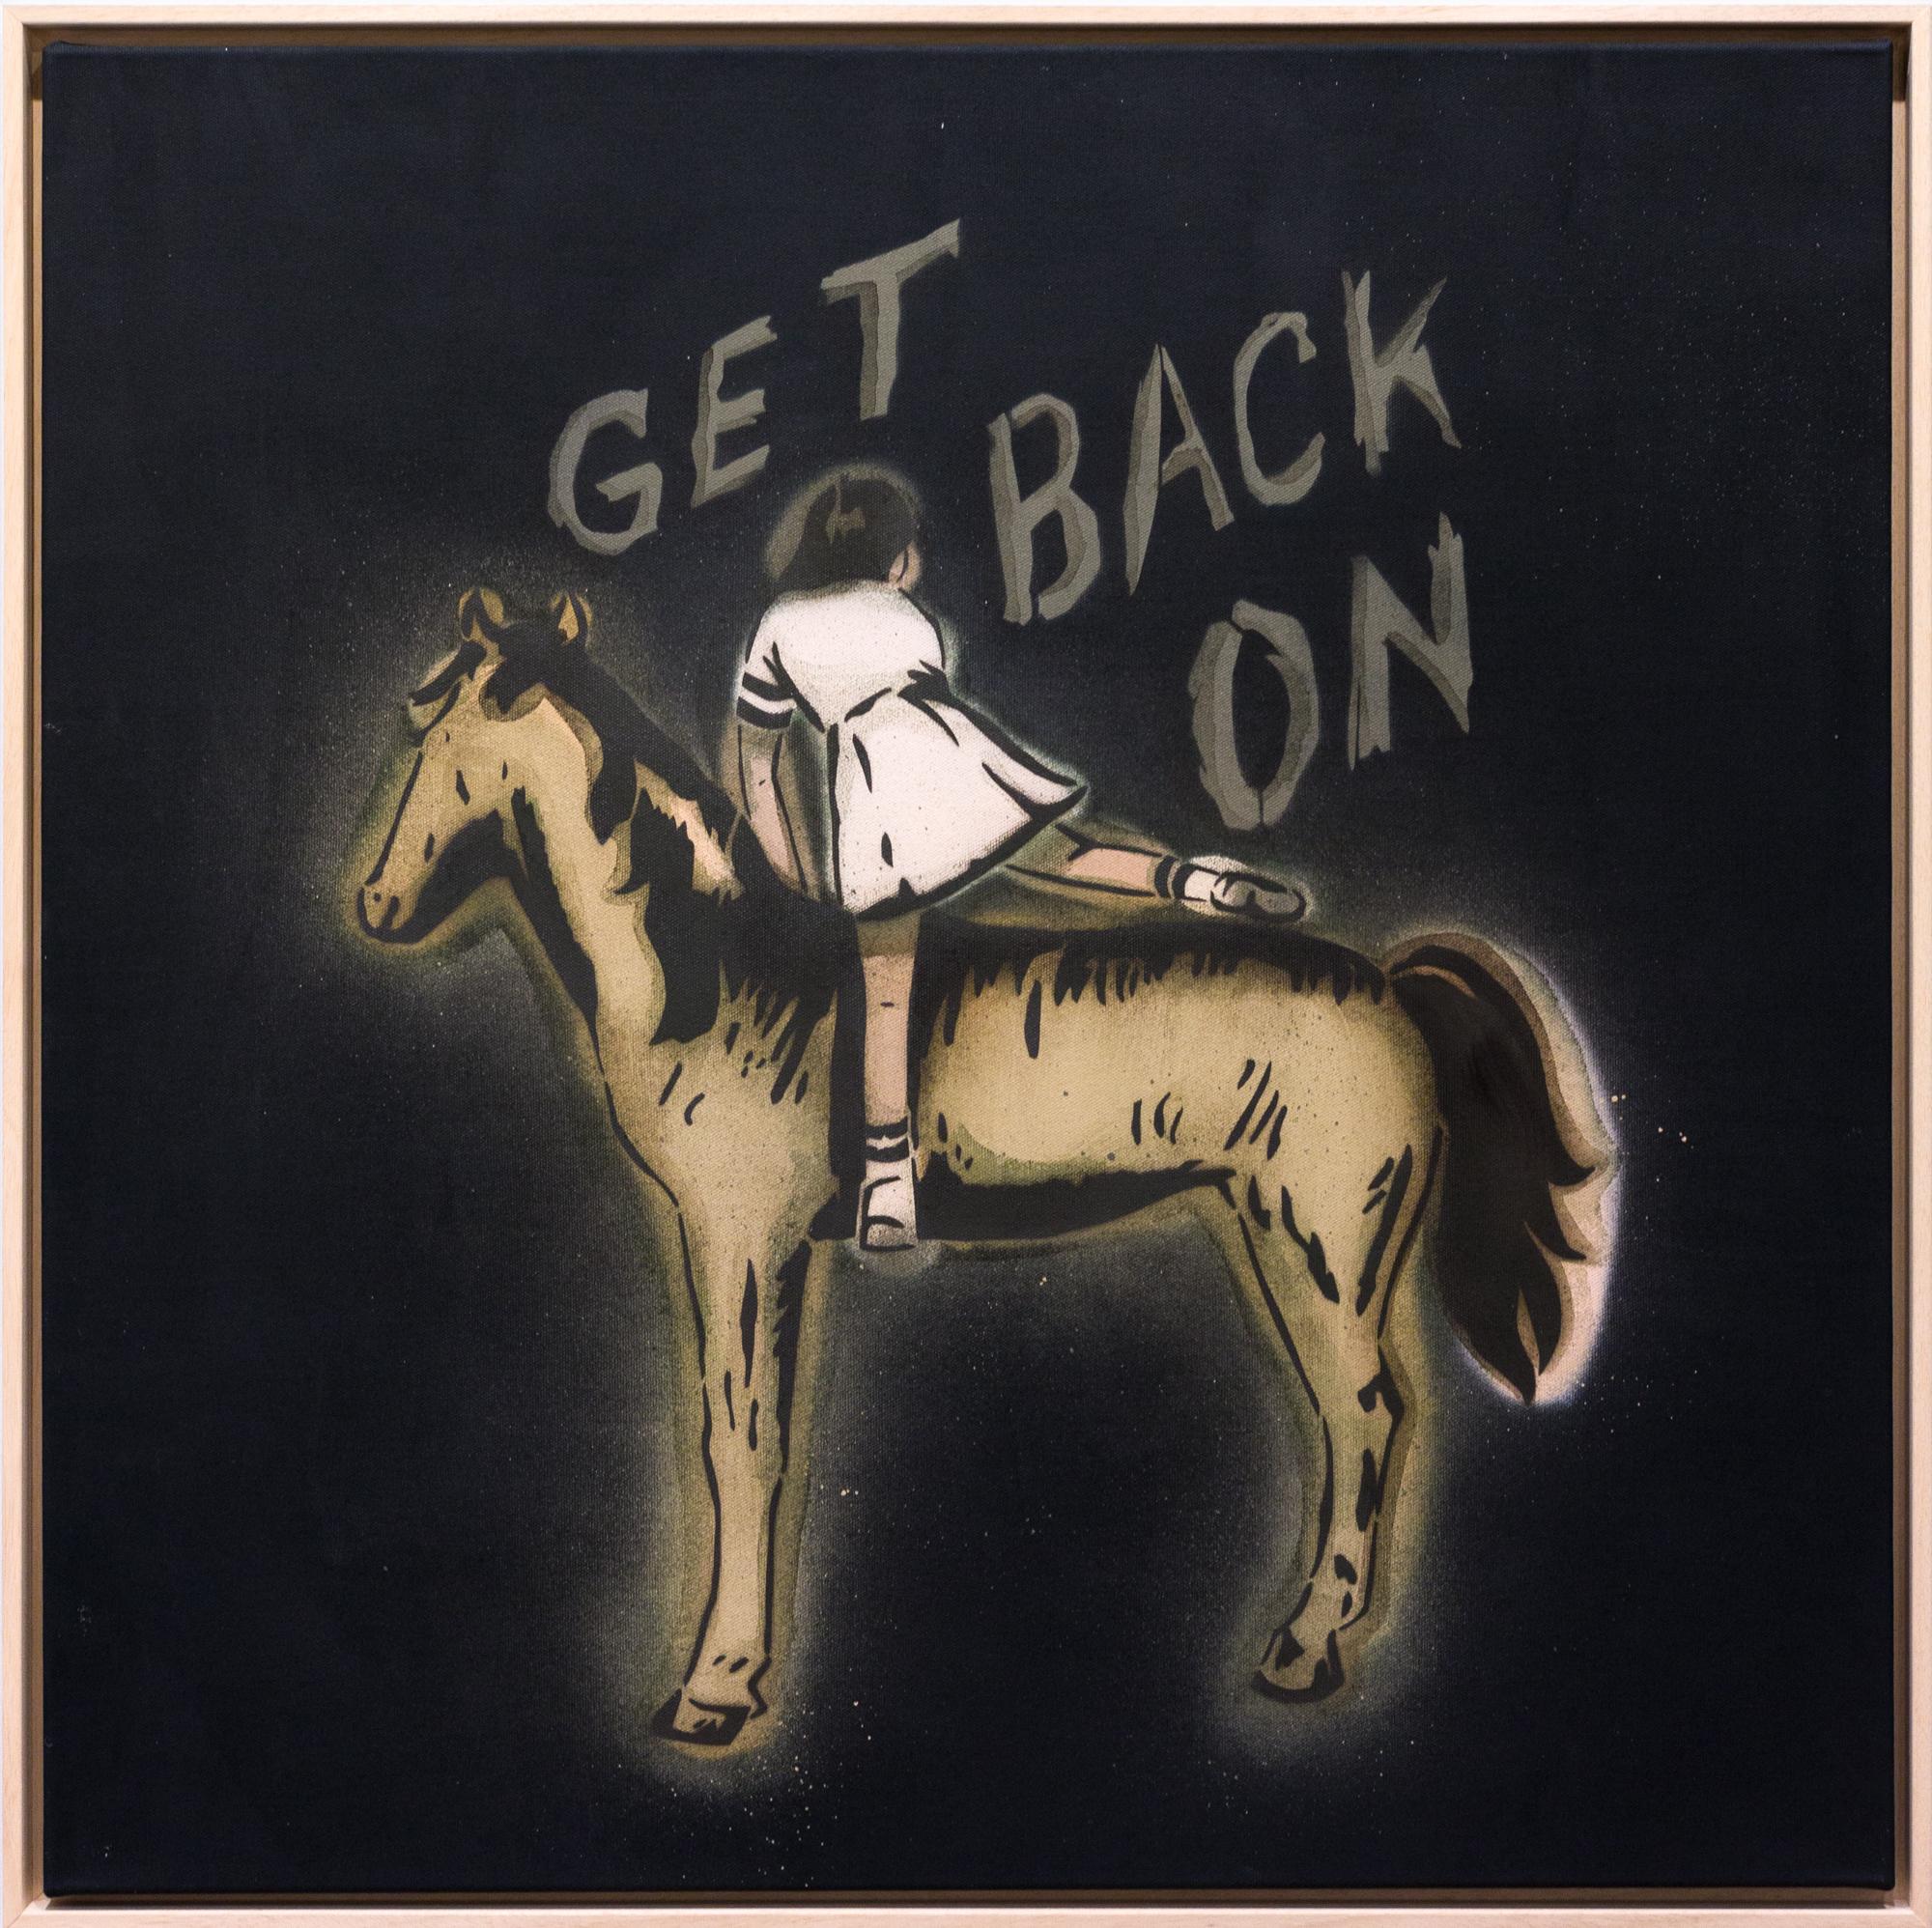 "Get Back On" Hand cut stencil, vintage imagery acrylic and aerosol - Mixed Media Art by Amanda Marie